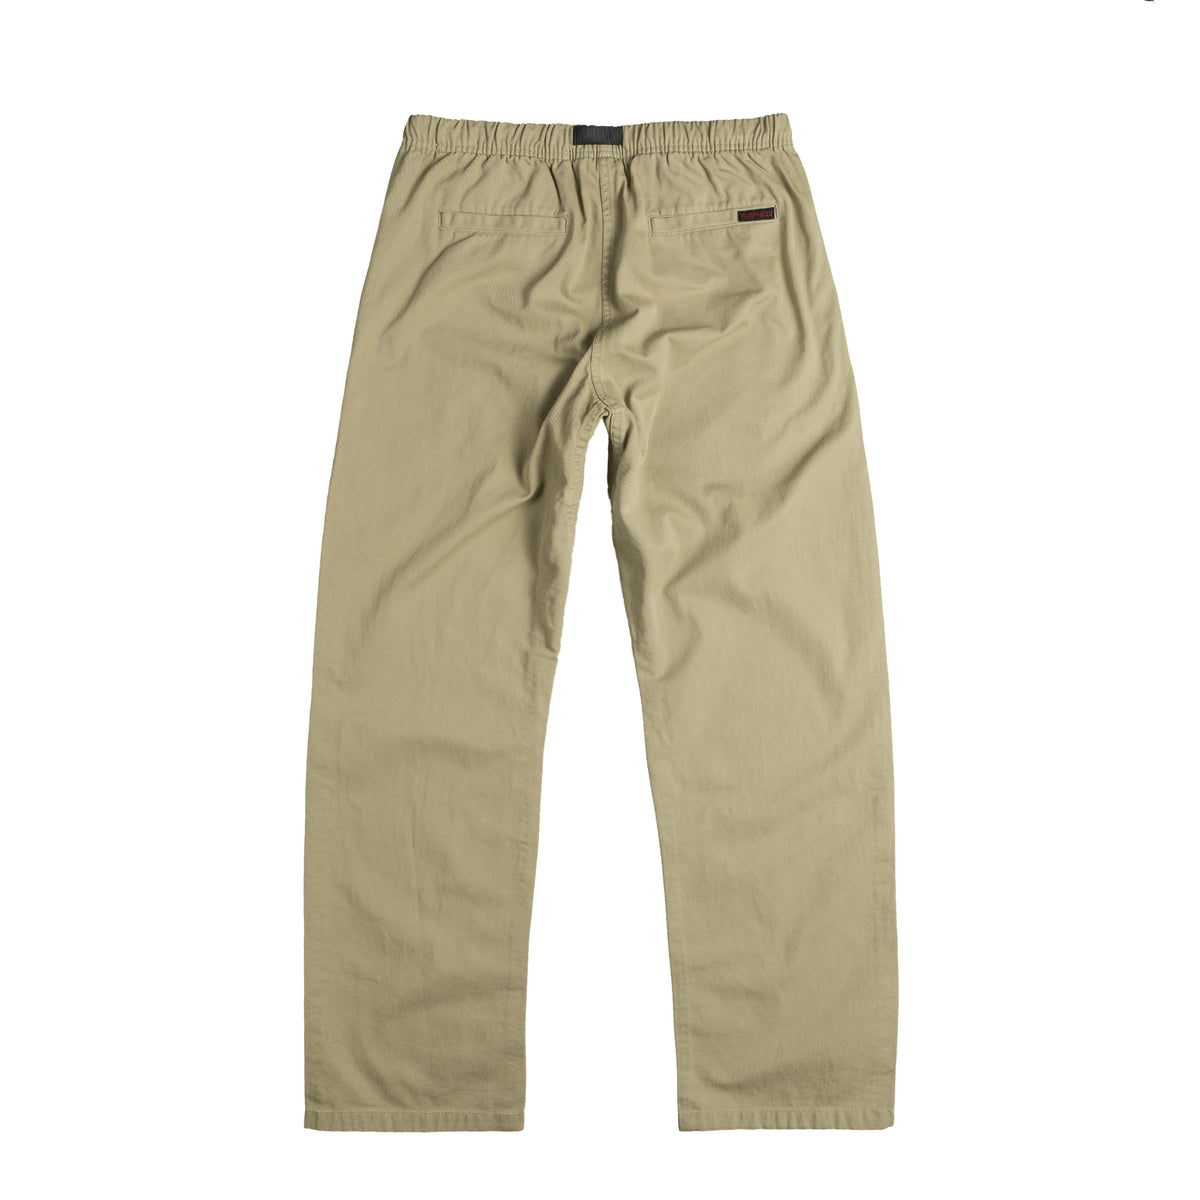 Pant – buy now at LangcomShops Online Store! - journeys shoes 